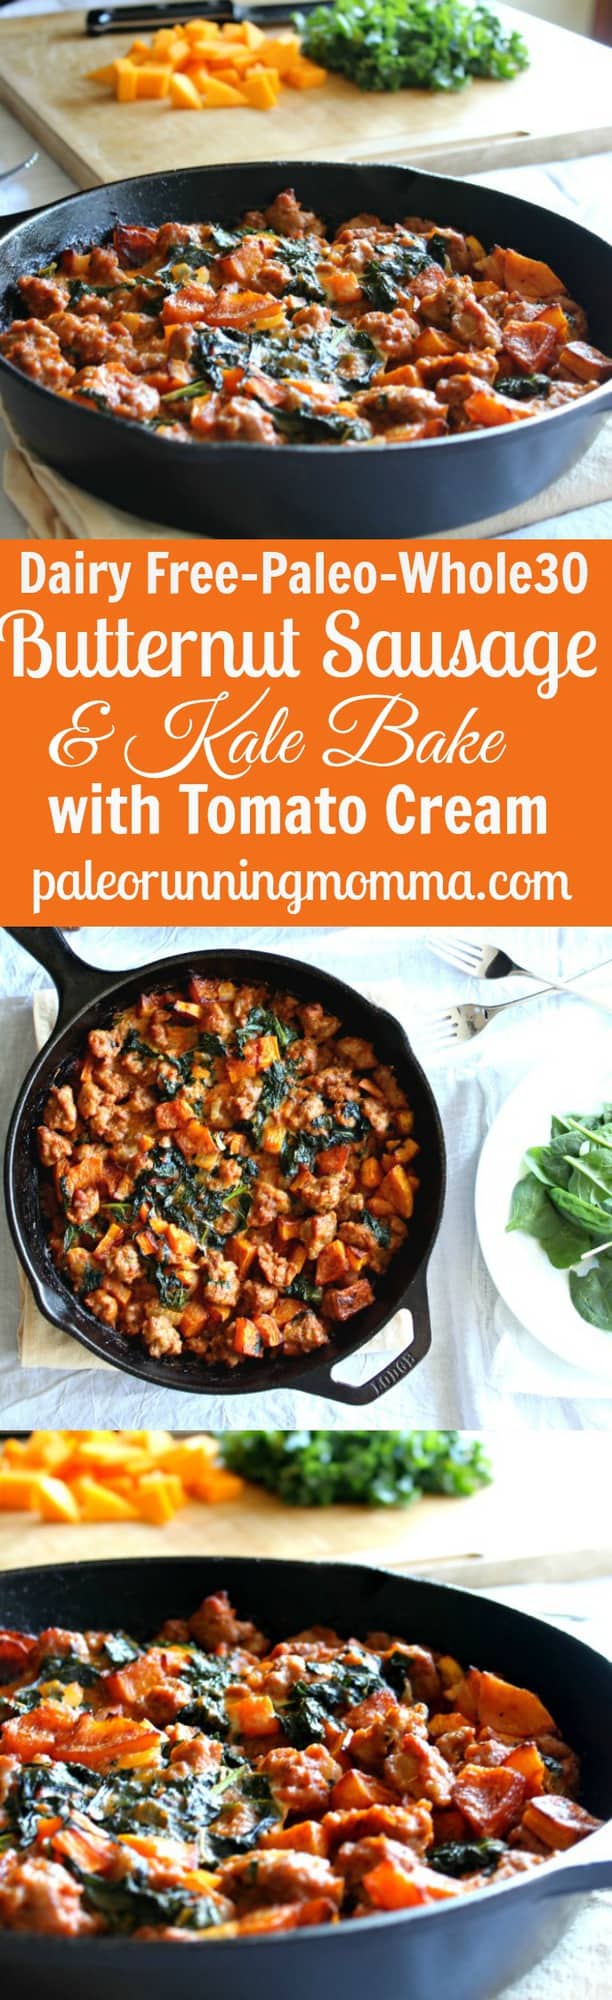 Dairy free, gluten free, paleo and whole30 friendly, this Butternut, Sausage, and Kale bake has a creamy tomato sauce that makes for a hearty, savory and irresistible one pot meal